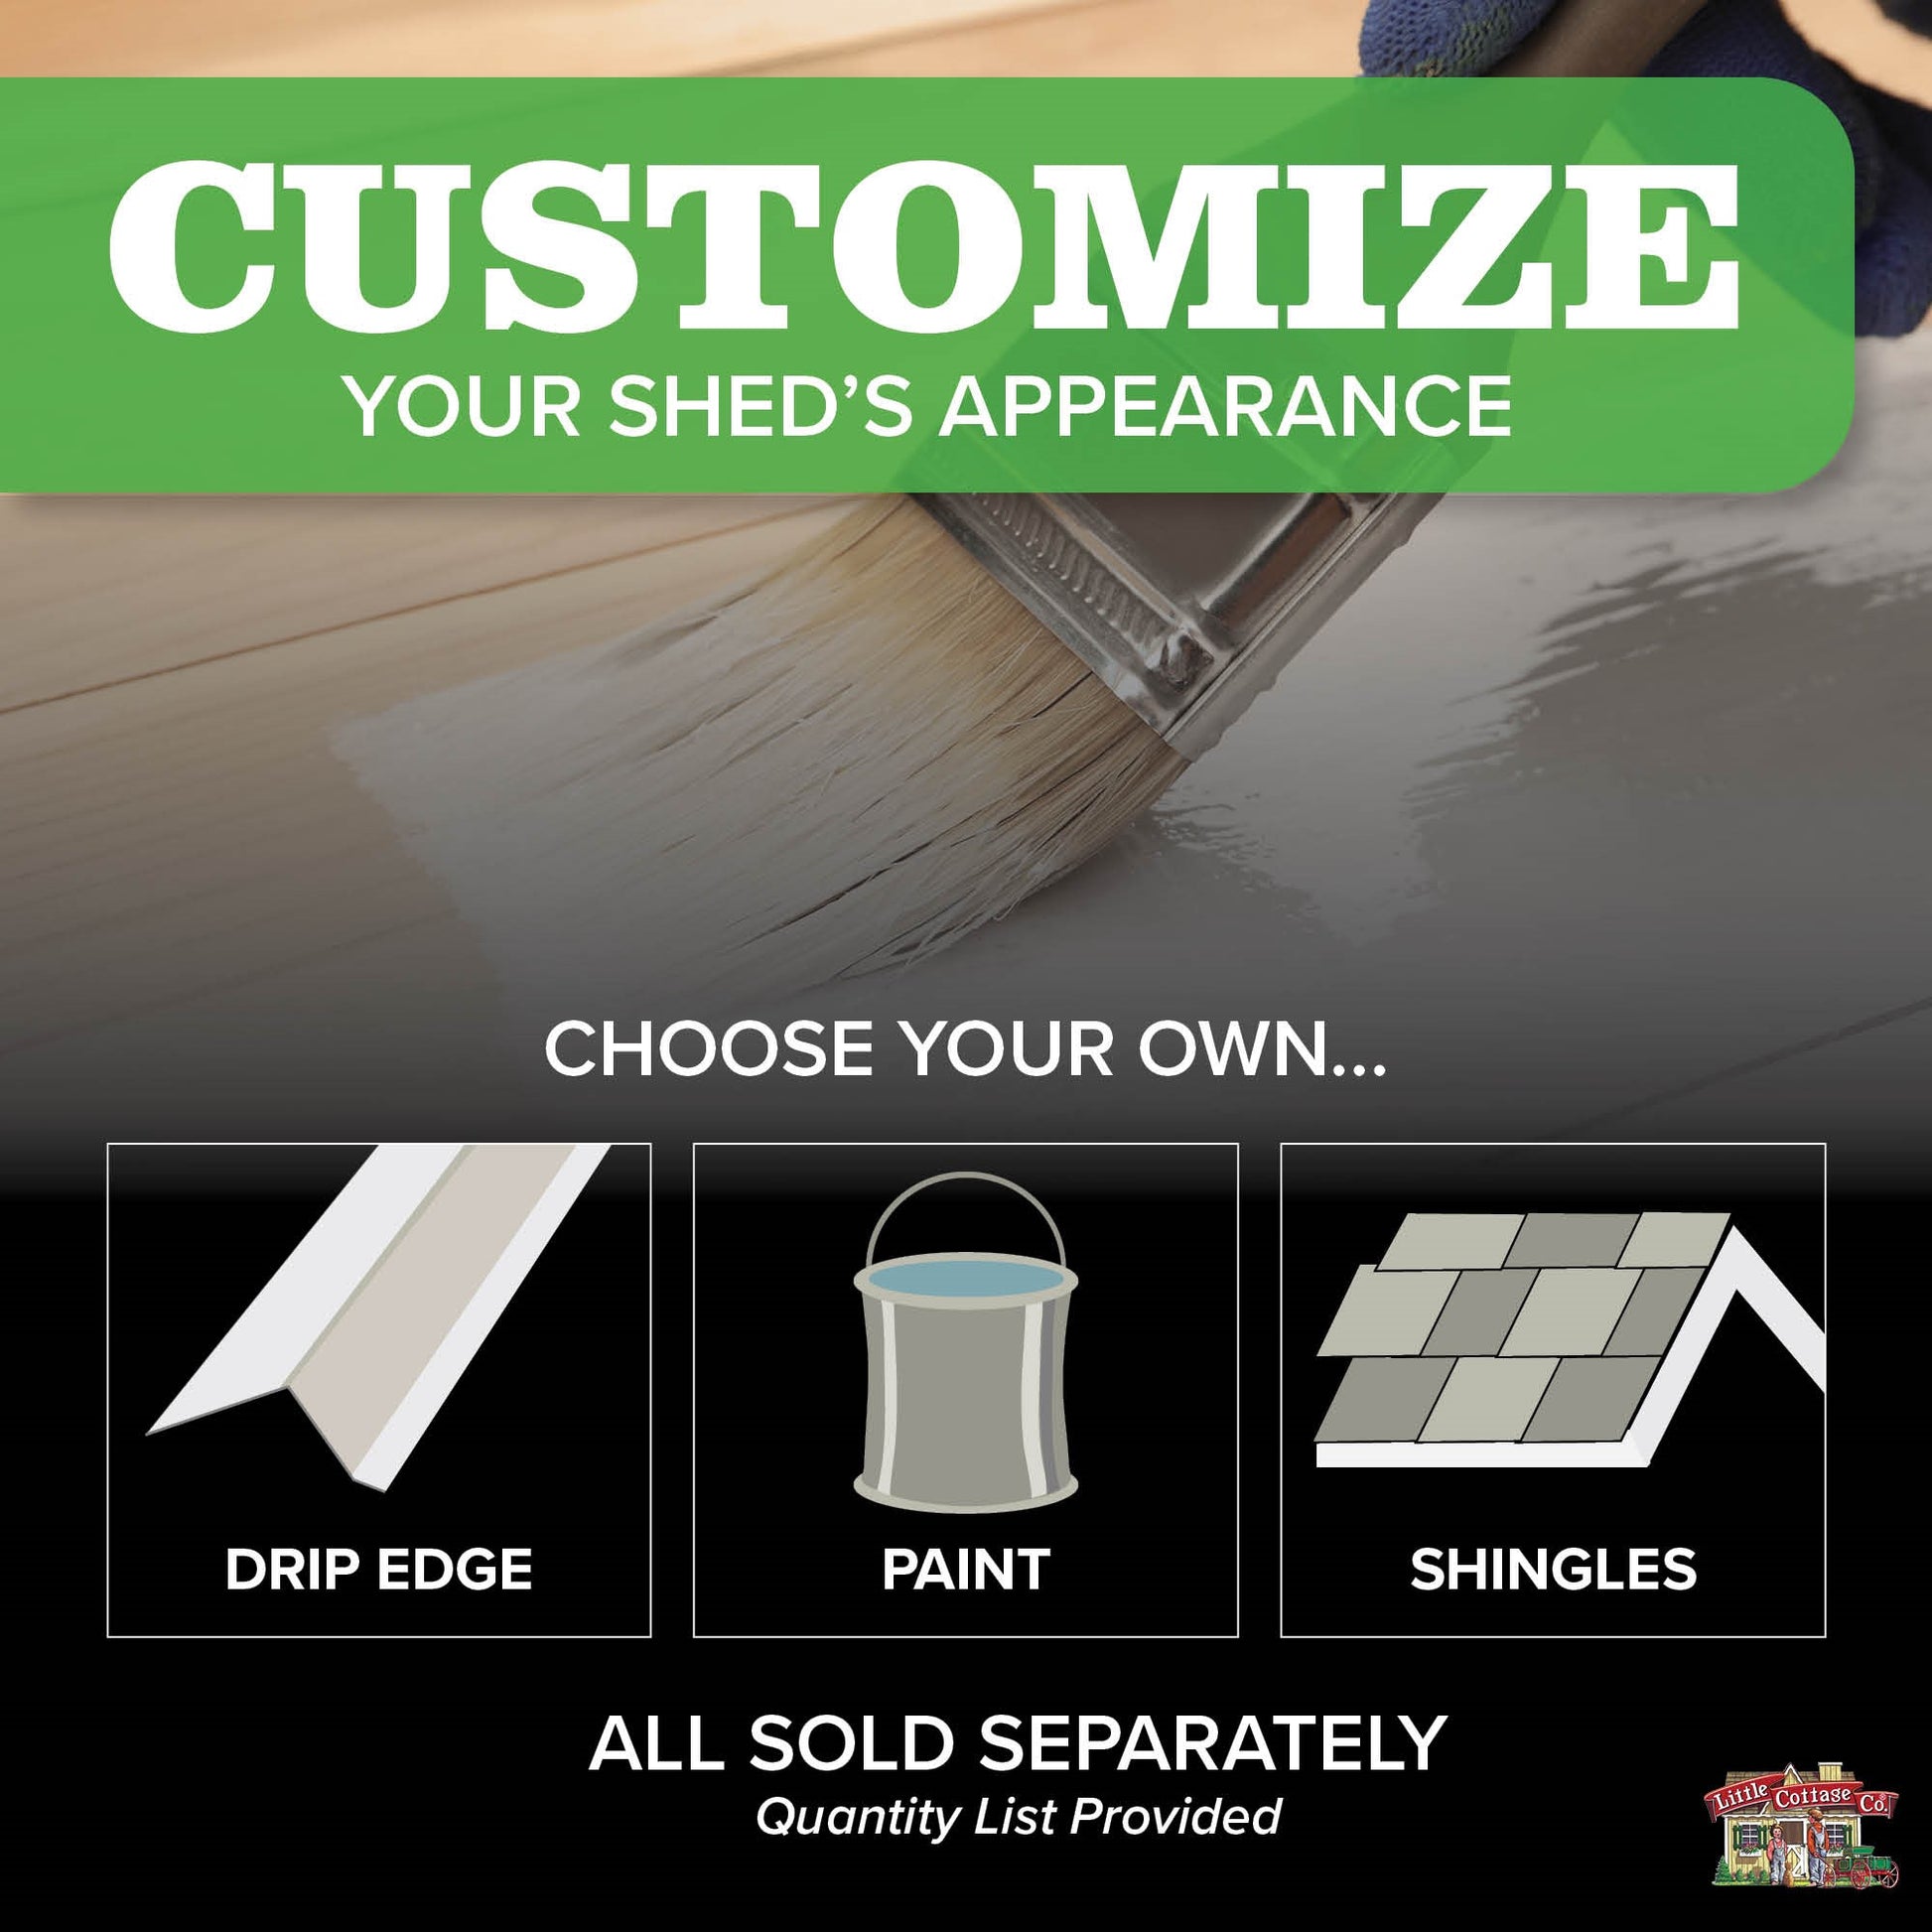 customize your shed's appearance with shingles and paint